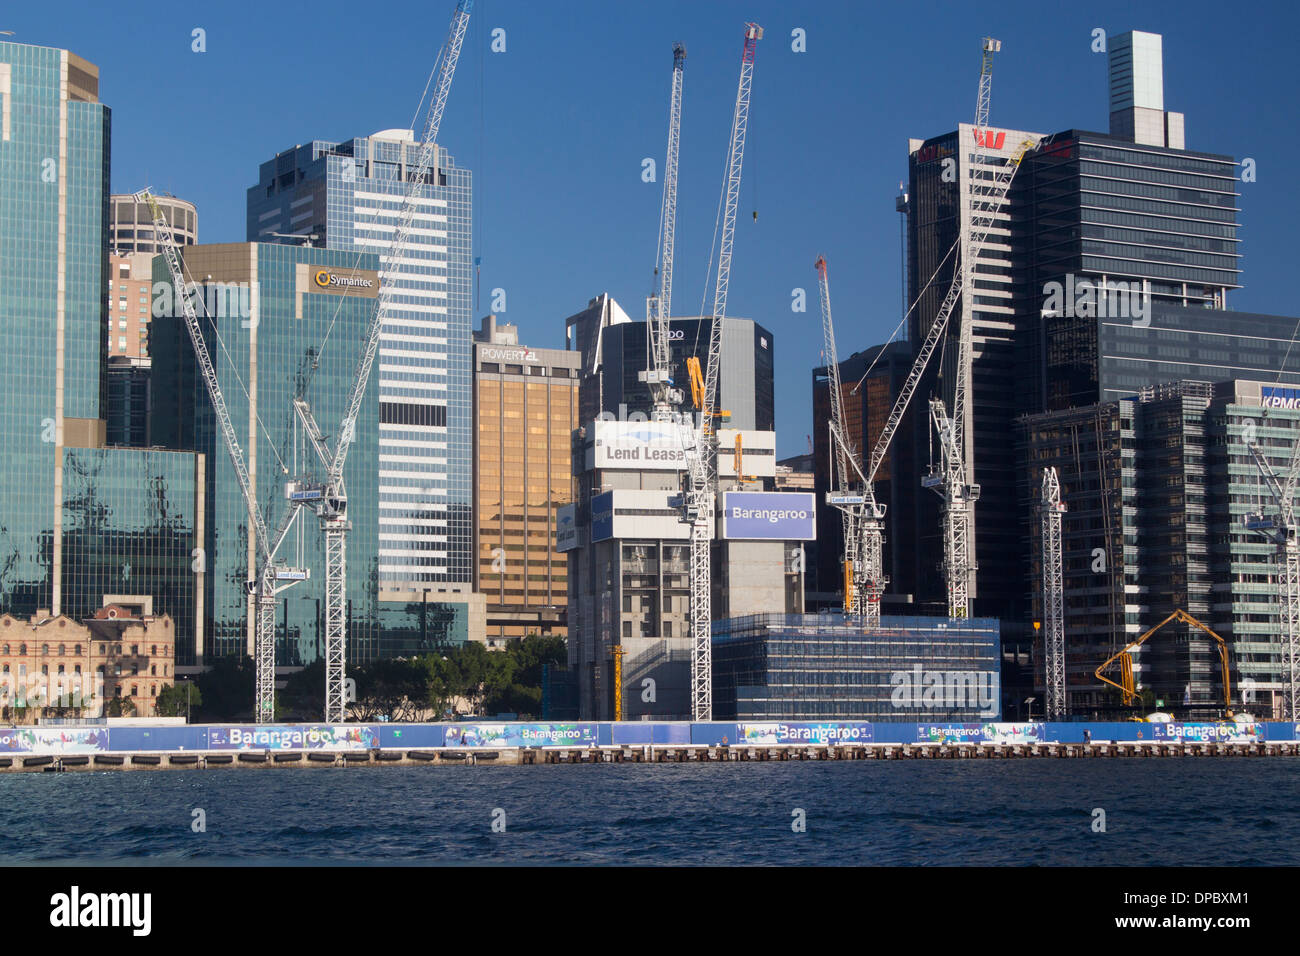 Barangaroo construction development with cranes, high rise buildings from Darling Harbour Sydney New South Wales NSW Australia Stock Photo